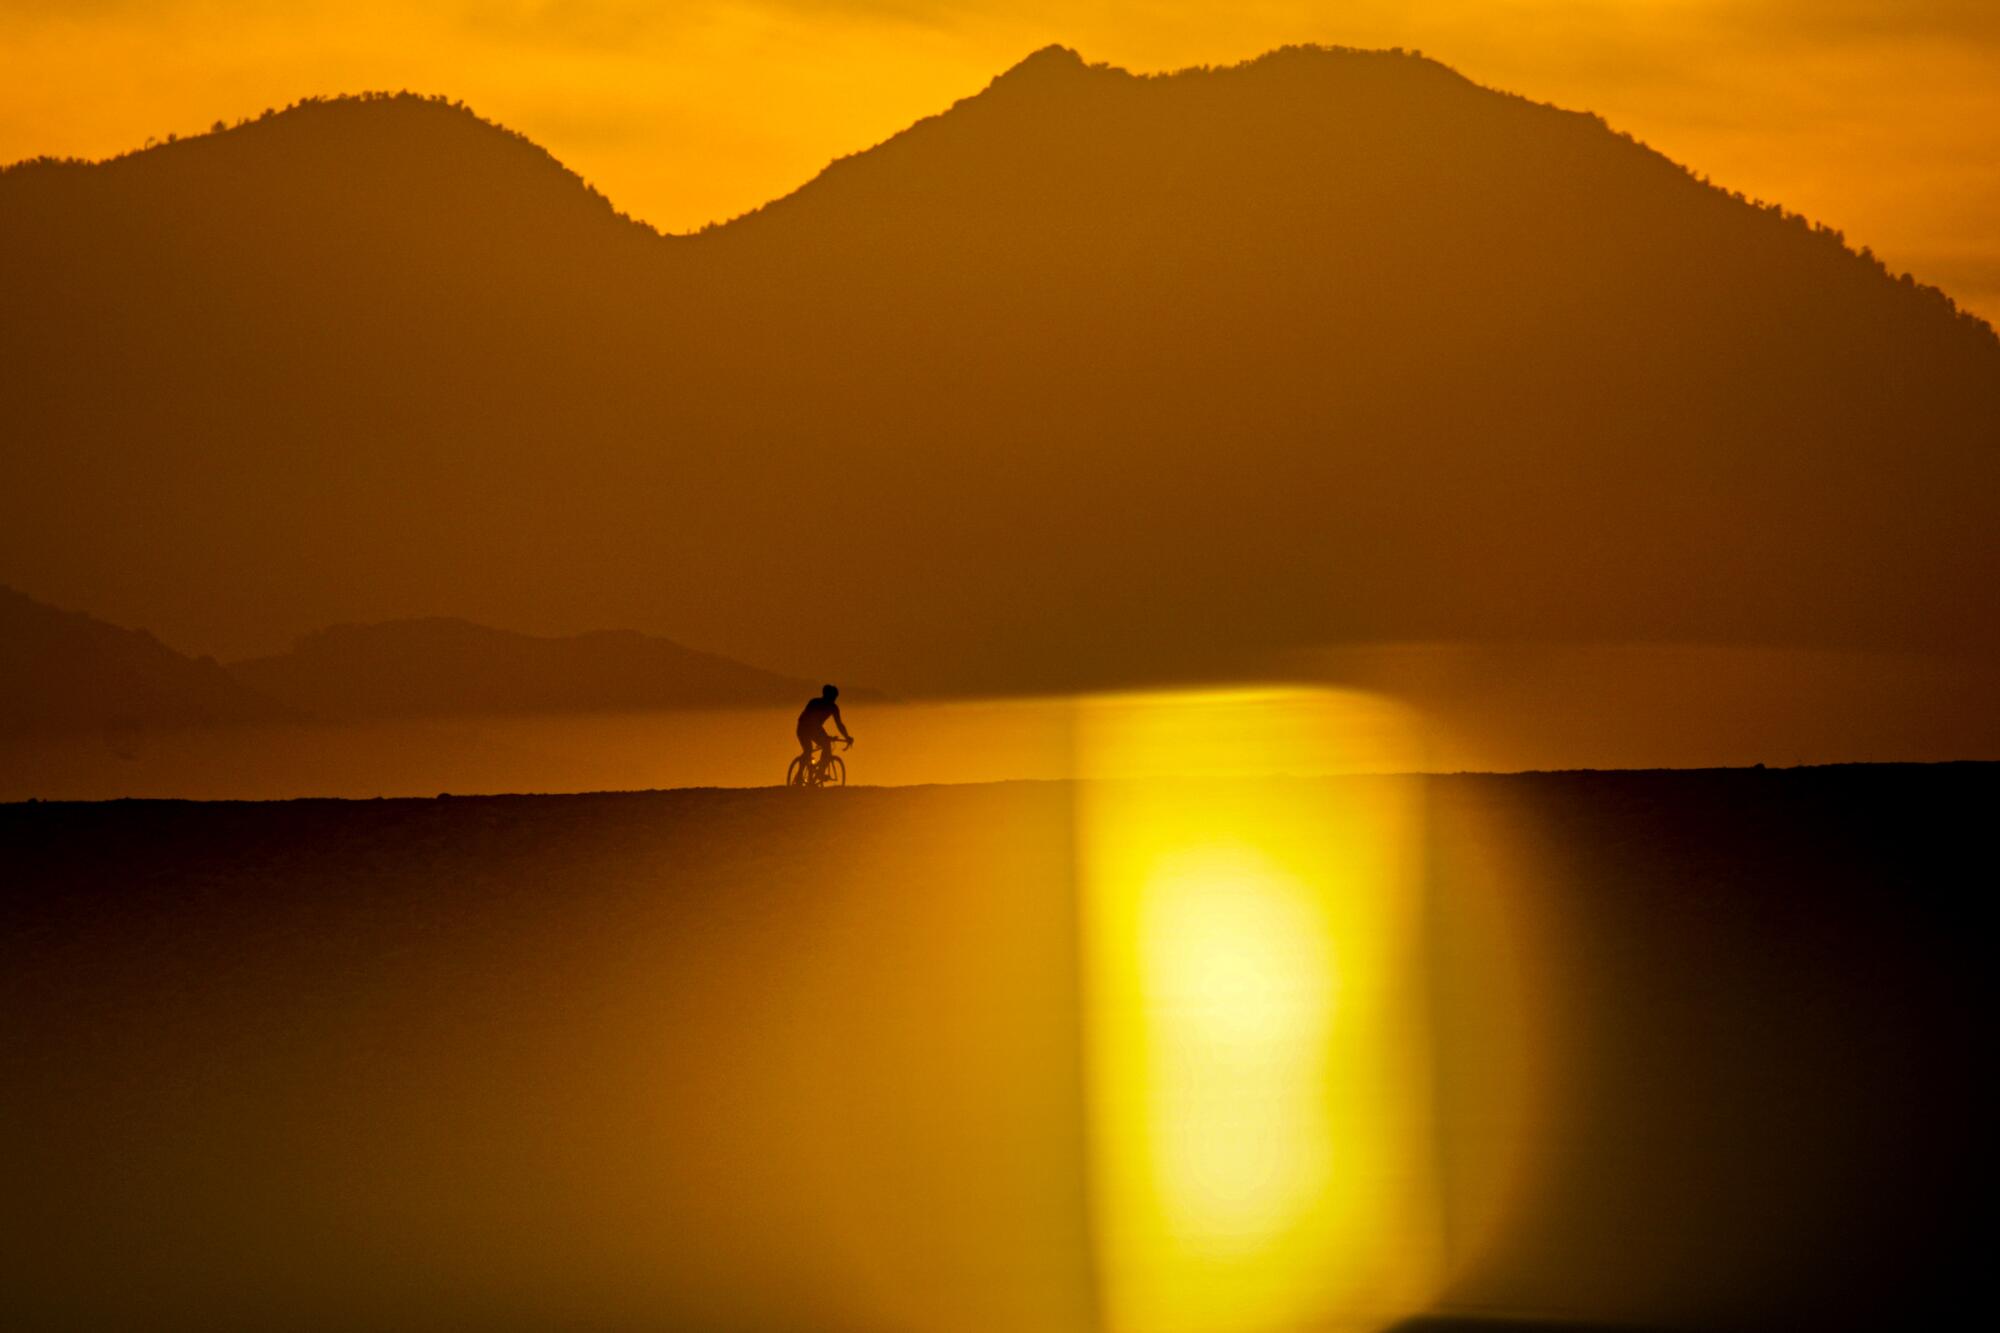 A bicyclist is framed by hills and golden light